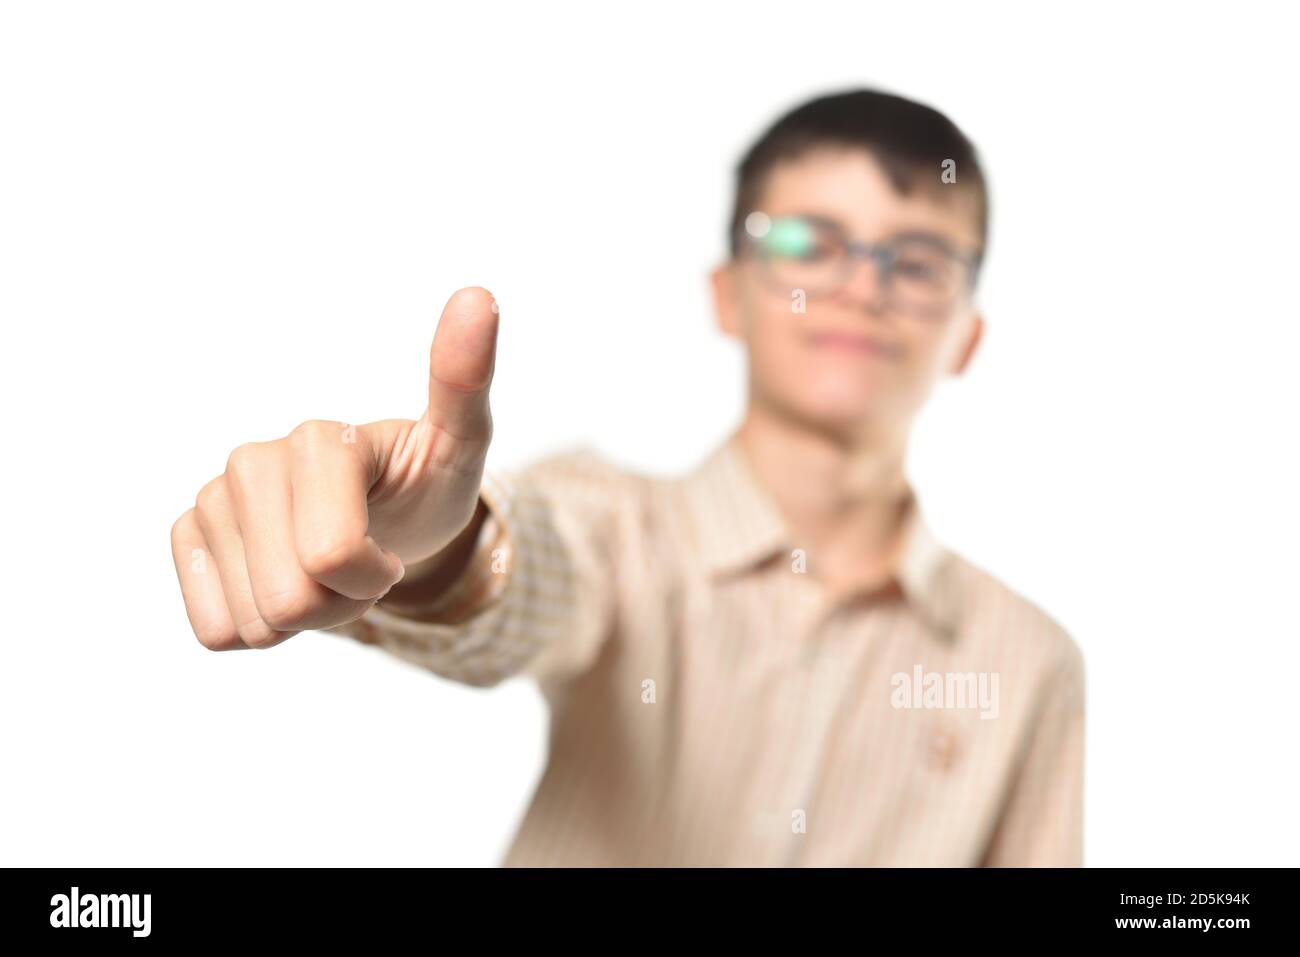 Teenager boy with glasses showing thumbs up gesture on white background Stock Photo